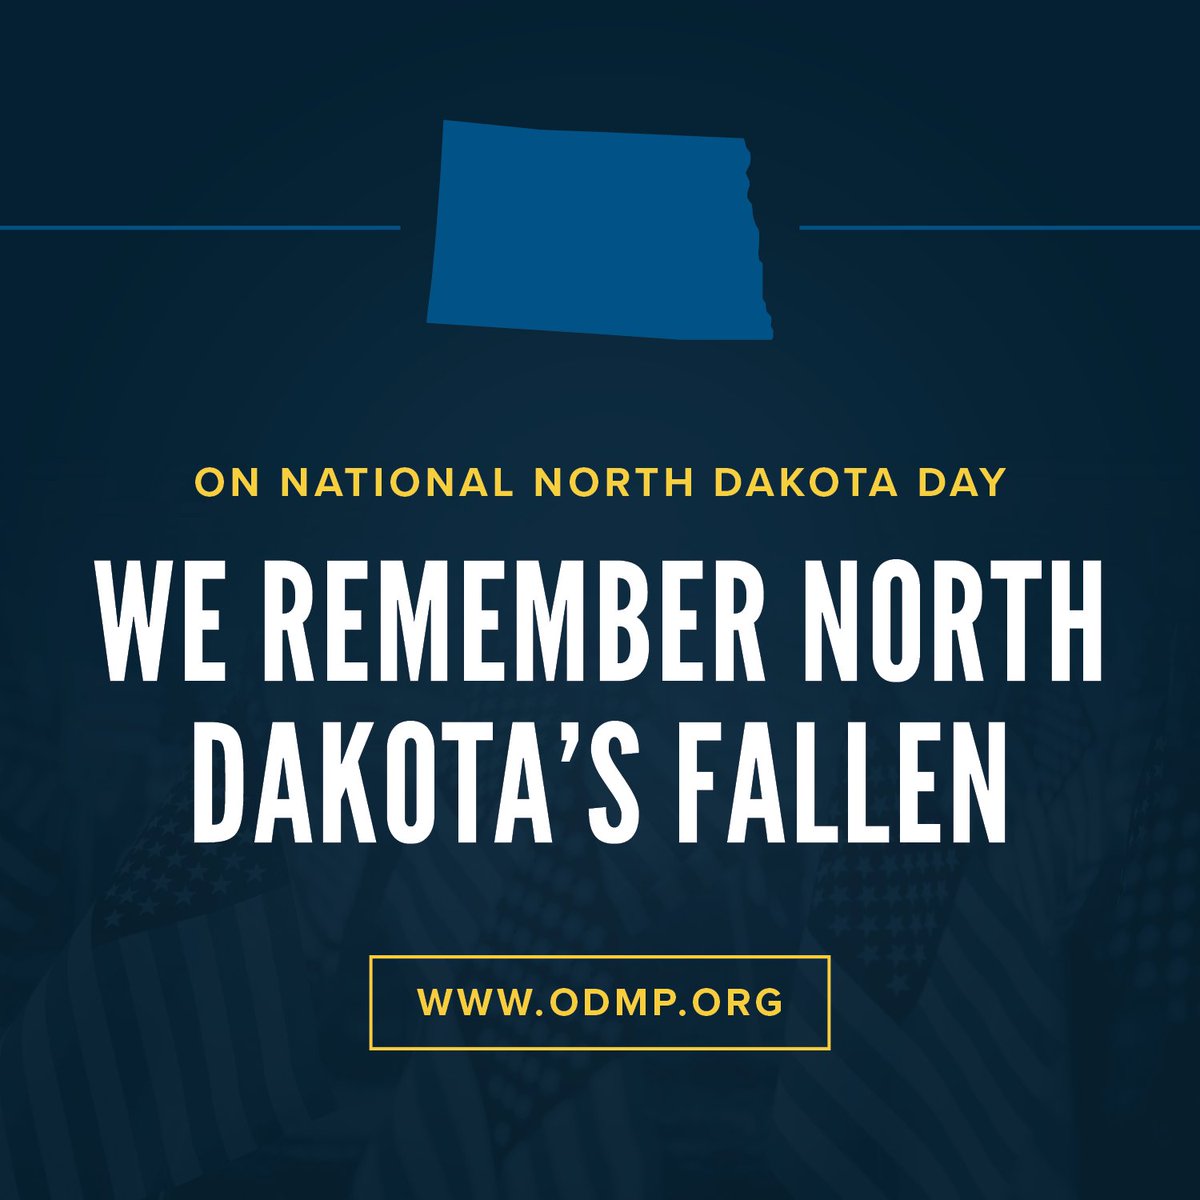 In honor of National North Dakota Day, ODMP recognizes those officers who made the ultimate sacrifice while serving and protecting the citizens of ND. Full biographies for each of these fallen heroes can be found at: odmp.org/search/browse/… #odmp #officerdown #rememberthefallen